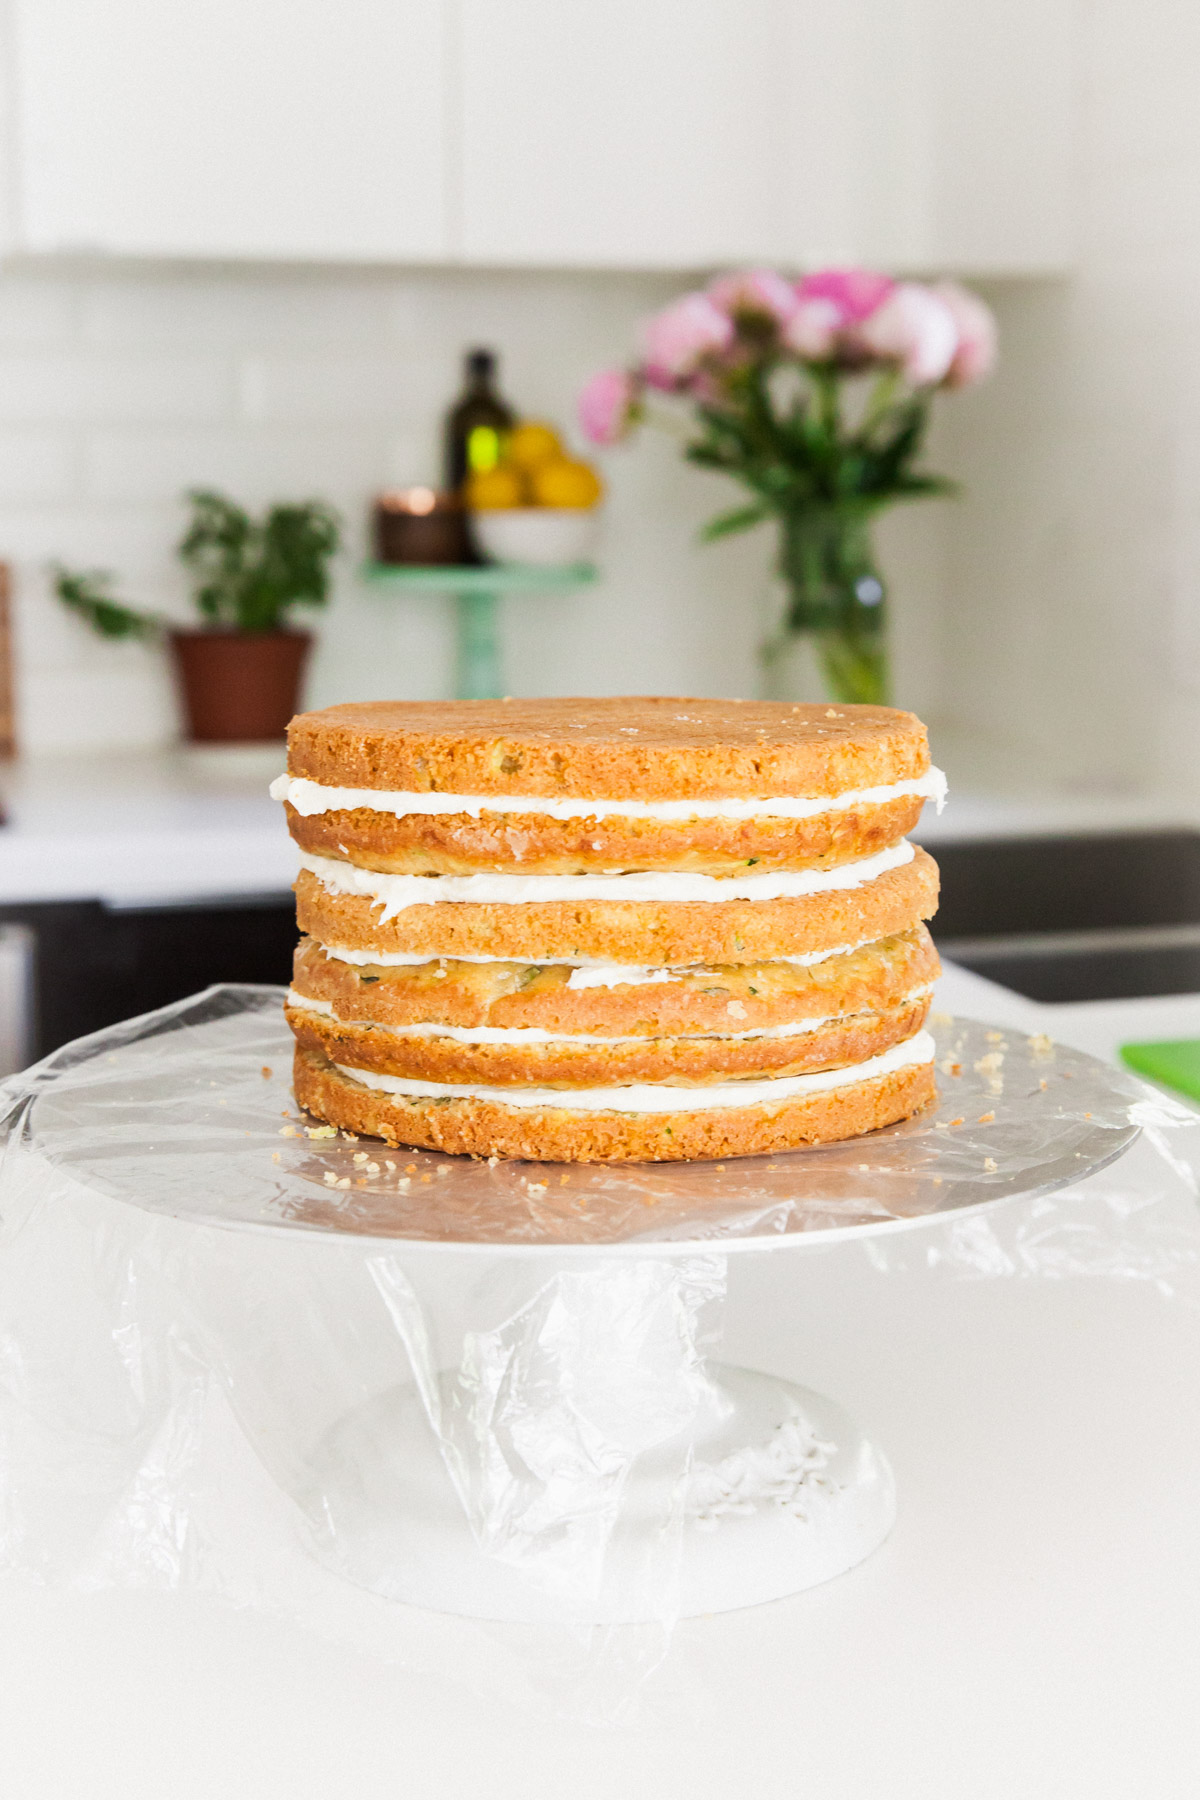 stacking a lemon zucchini cake with goat cheese frosting